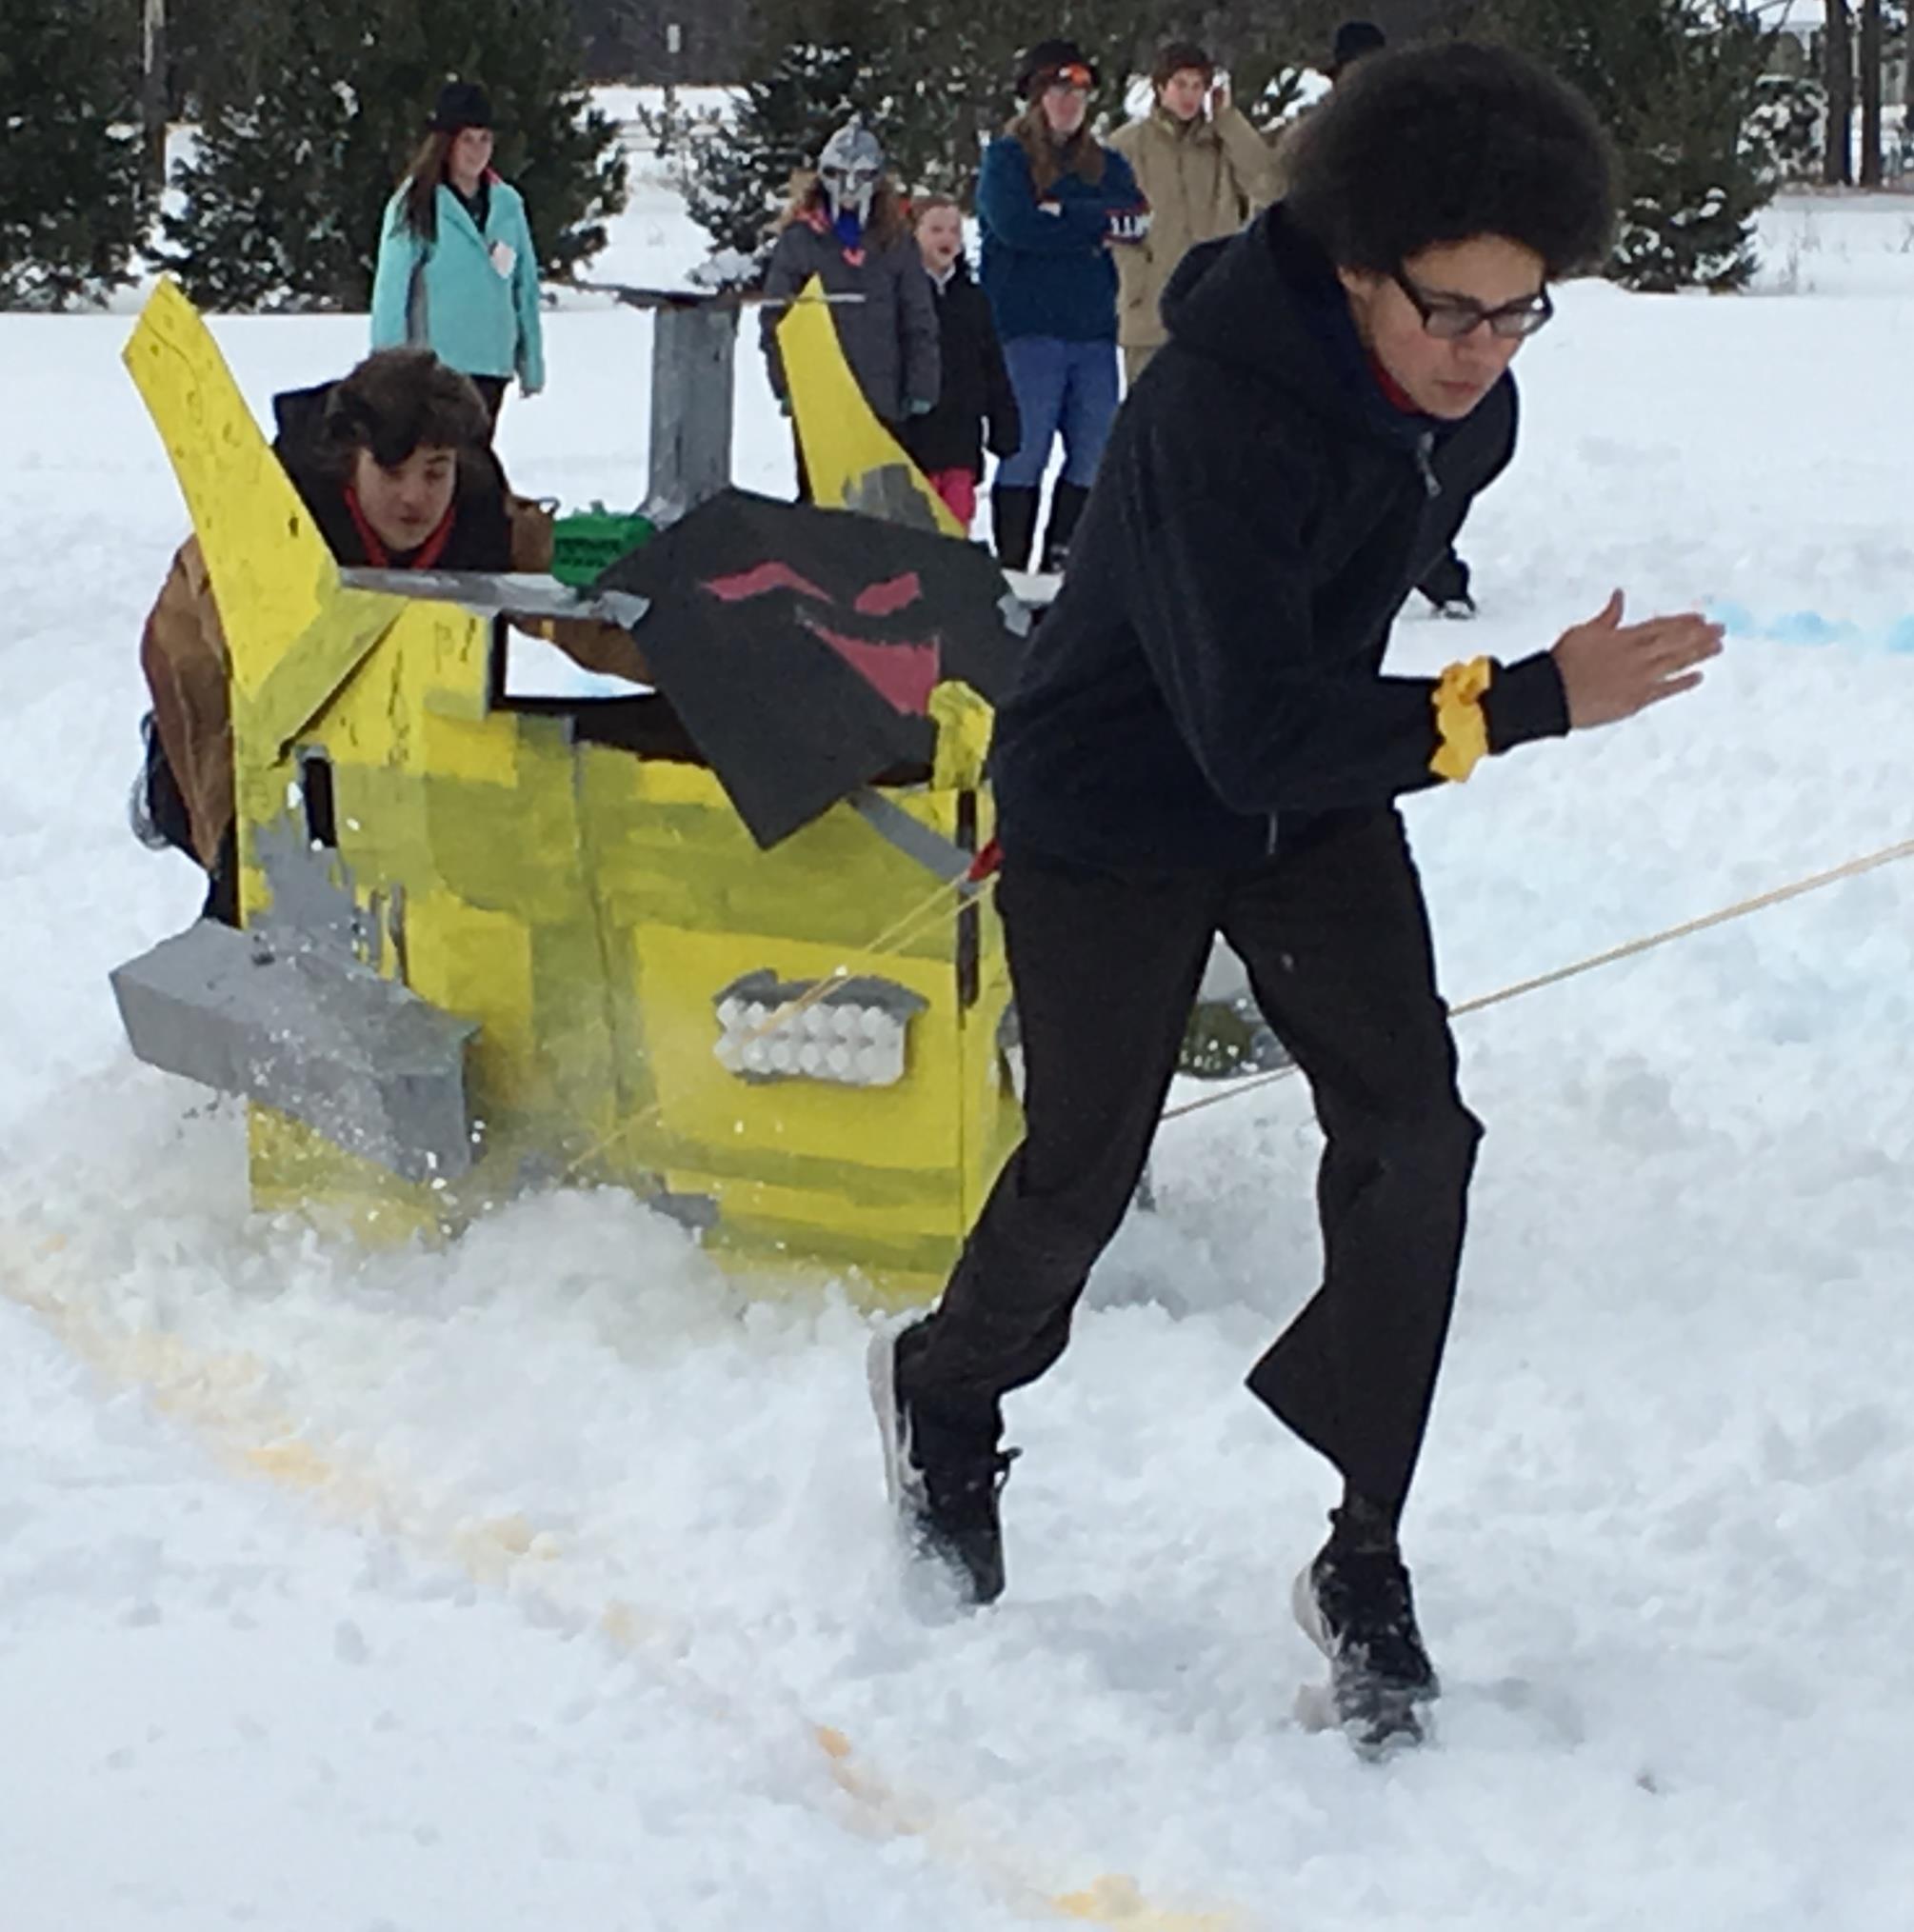 Students participating in cardboard sled race.